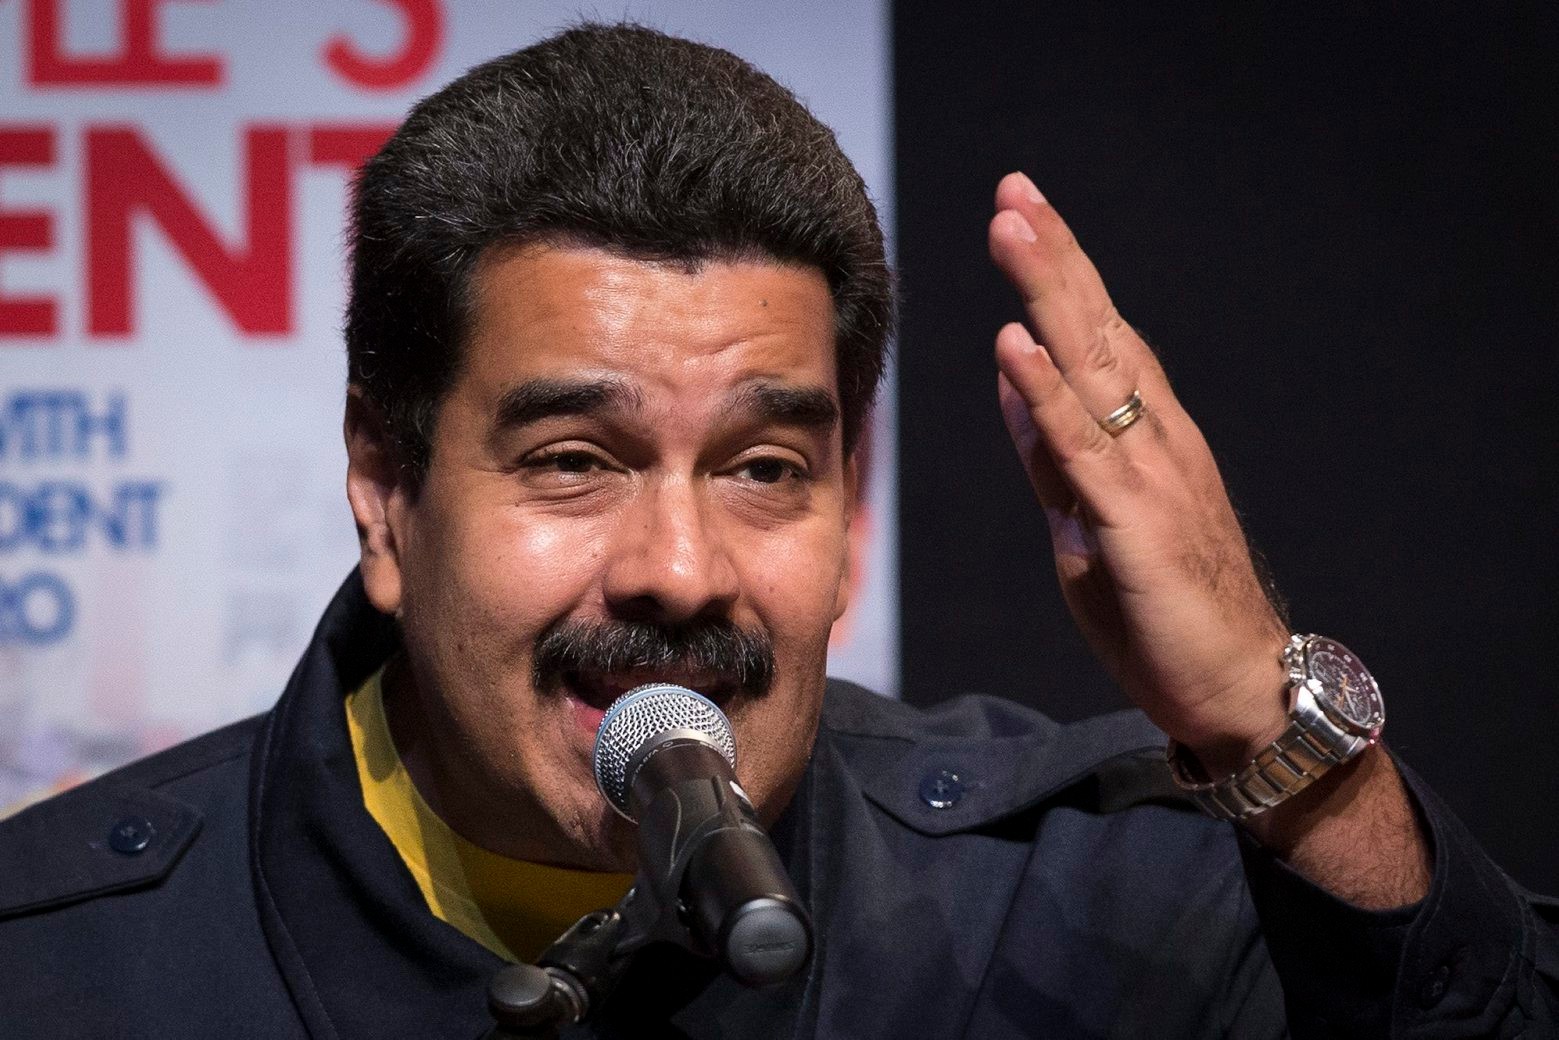 Nicolas Maduro, President of Venezuela, speaks at Hostos Community College as the United Nations General Assembly convenes, Tuesday, Sept. 23, 2014, in the Bronx borough of New York. (AP Photo/John Minchillo) Venezuela-Maduro in New York